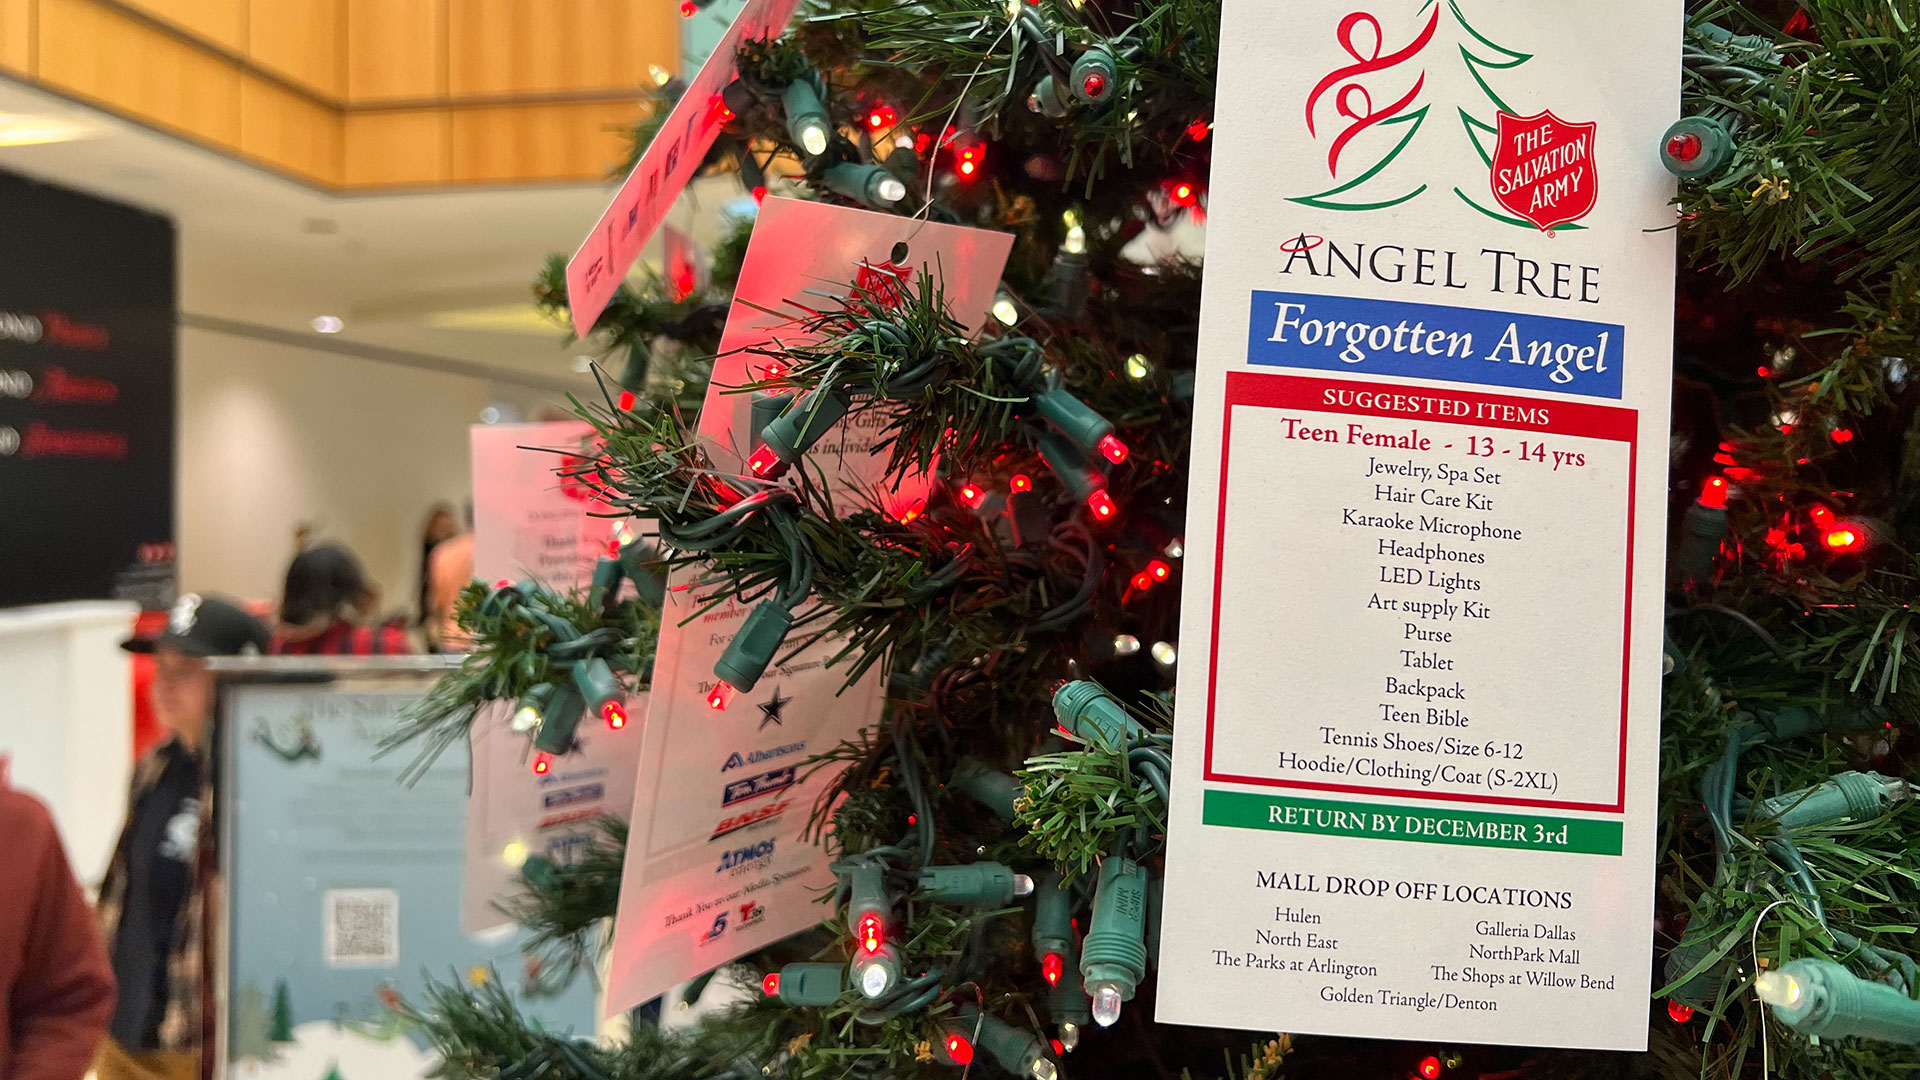 Deadline to Adopt Angels From Salvation Army Angel Tree is Dec. 3